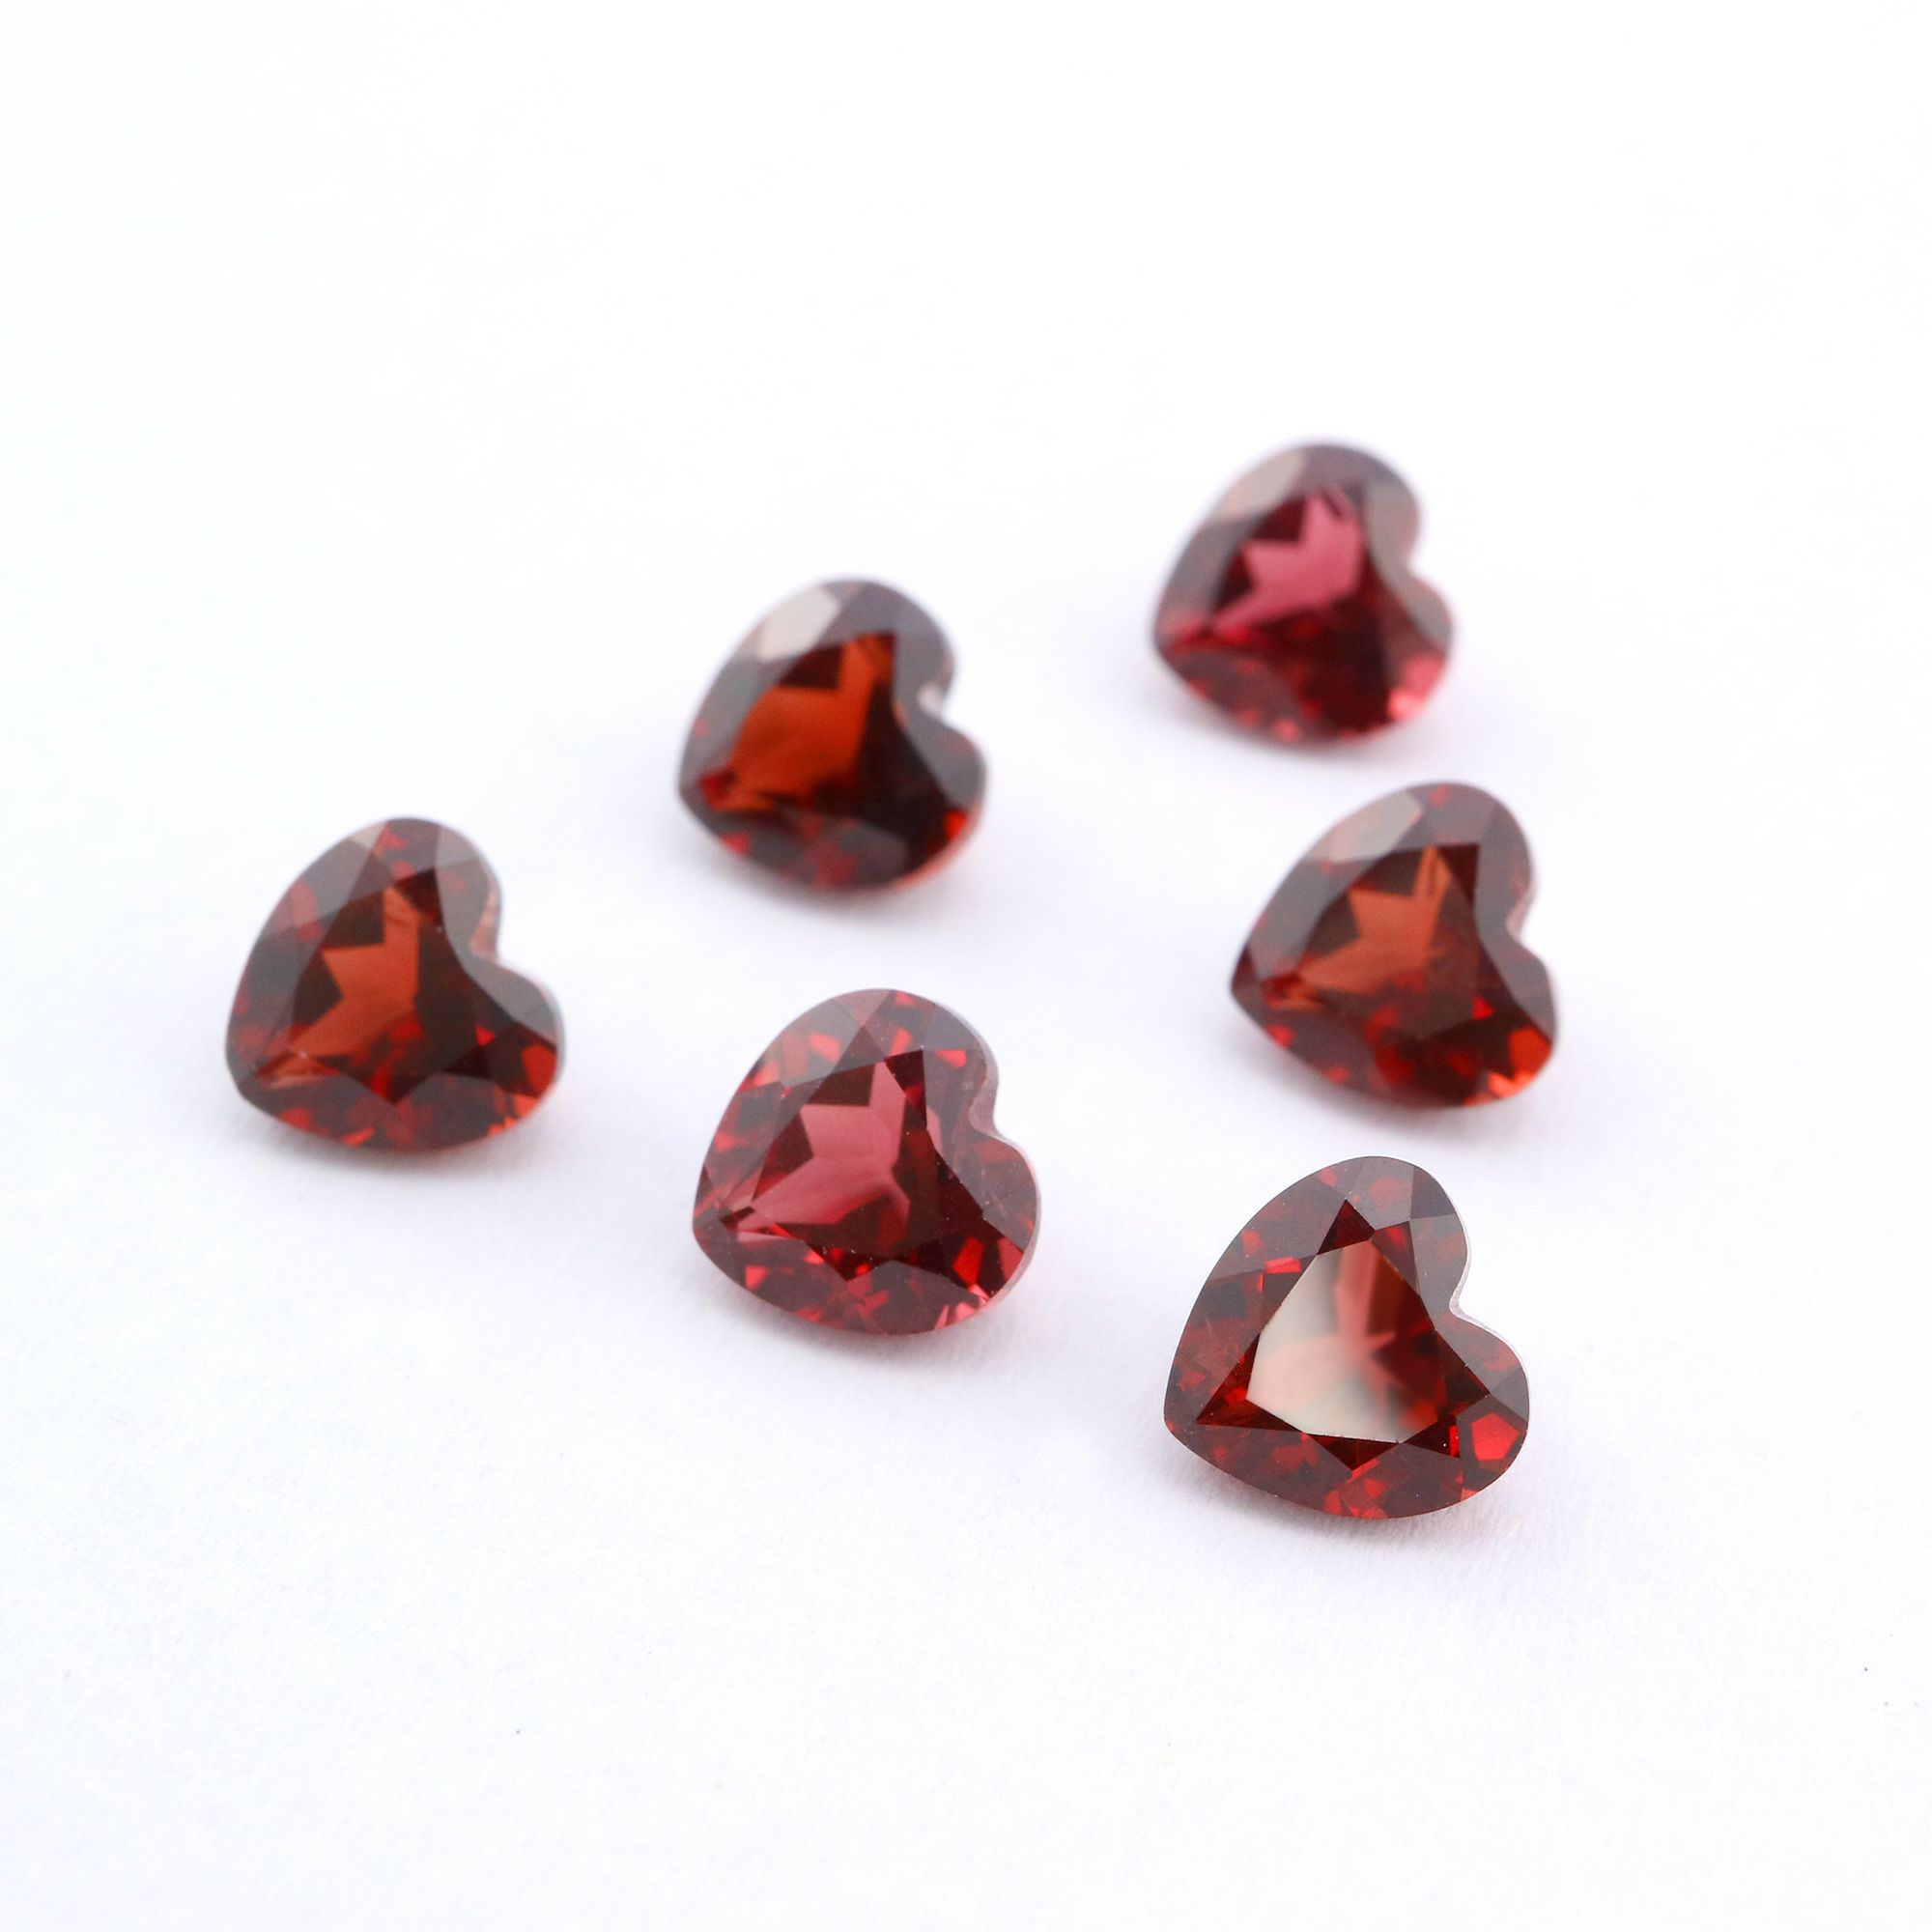 1Pcs Heart Red Garnet January Birthstone Faceted Cut Loose Gemstone Nature Semi Precious Stone DIY Jewelry Supplies 4130014 - Click Image to Close